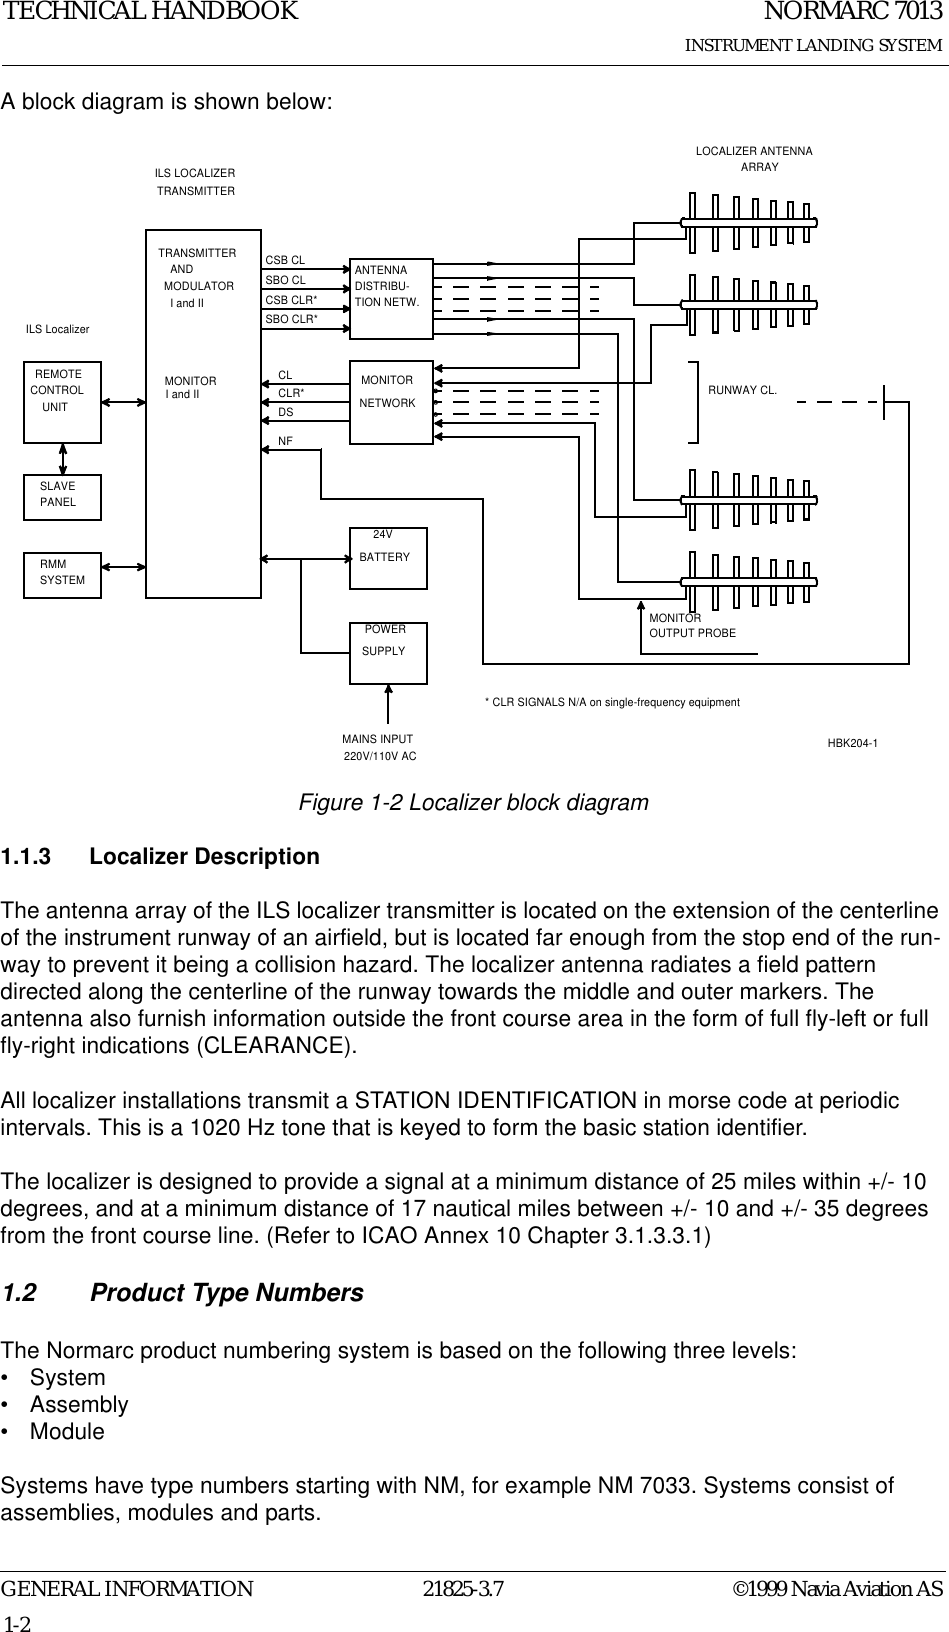 NORMARC 7013INSTRUMENT LANDING SYSTEMTECHNICAL HANDBOOKGENERAL INFORMATION 21825-3.7 ©1999 Navia Aviation AS1-2A block diagram is shown below: Figure 1-2 Localizer block diagram1.1.3 Localizer DescriptionThe antenna array of the ILS localizer transmitter is located on the extension of the centerline of the instrument runway of an airfield, but is located far enough from the stop end of the run-way to prevent it being a collision hazard. The localizer antenna radiates a field pattern directed along the centerline of the runway towards the middle and outer markers. The antenna also furnish information outside the front course area in the form of full fly-left or full fly-right indications (CLEARANCE).All localizer installations transmit a STATION IDENTIFICATION in morse code at periodic intervals. This is a 1020 Hz tone that is keyed to form the basic station identifier.The localizer is designed to provide a signal at a minimum distance of 25 miles within +/- 10 degrees, and at a minimum distance of 17 nautical miles between +/- 10 and +/- 35 degrees from the front course line. (Refer to ICAO Annex 10 Chapter 3.1.3.3.1)1.2 Product Type NumbersThe Normarc product numbering system is based on the following three levels:•System• Assembly• ModuleSystems have type numbers starting with NM, for example NM 7033. Systems consist of assemblies, modules and parts.MAINS INPUTTION NETW.DISTRIBU-SYSTEMRMMPANELSLAVESUPPLYPOWERBATTERY24VCONTROLUNITREMOTE MONITORMODULATORTRANSMITTERCLR*NFDSCL MONITORNETWORKSBO CLR*CSB CLR*SBO CLCSB CL ANTENNATRANSMITTERILS LOCALIZEROUTPUT PROBEMONITORARRAYLOCALIZER ANTENNARUNWAY CL.HBK204-1ANDI and III and IIILS Localizer220V/110V AC* CLR SIGNALS N/A on single-frequency equipment